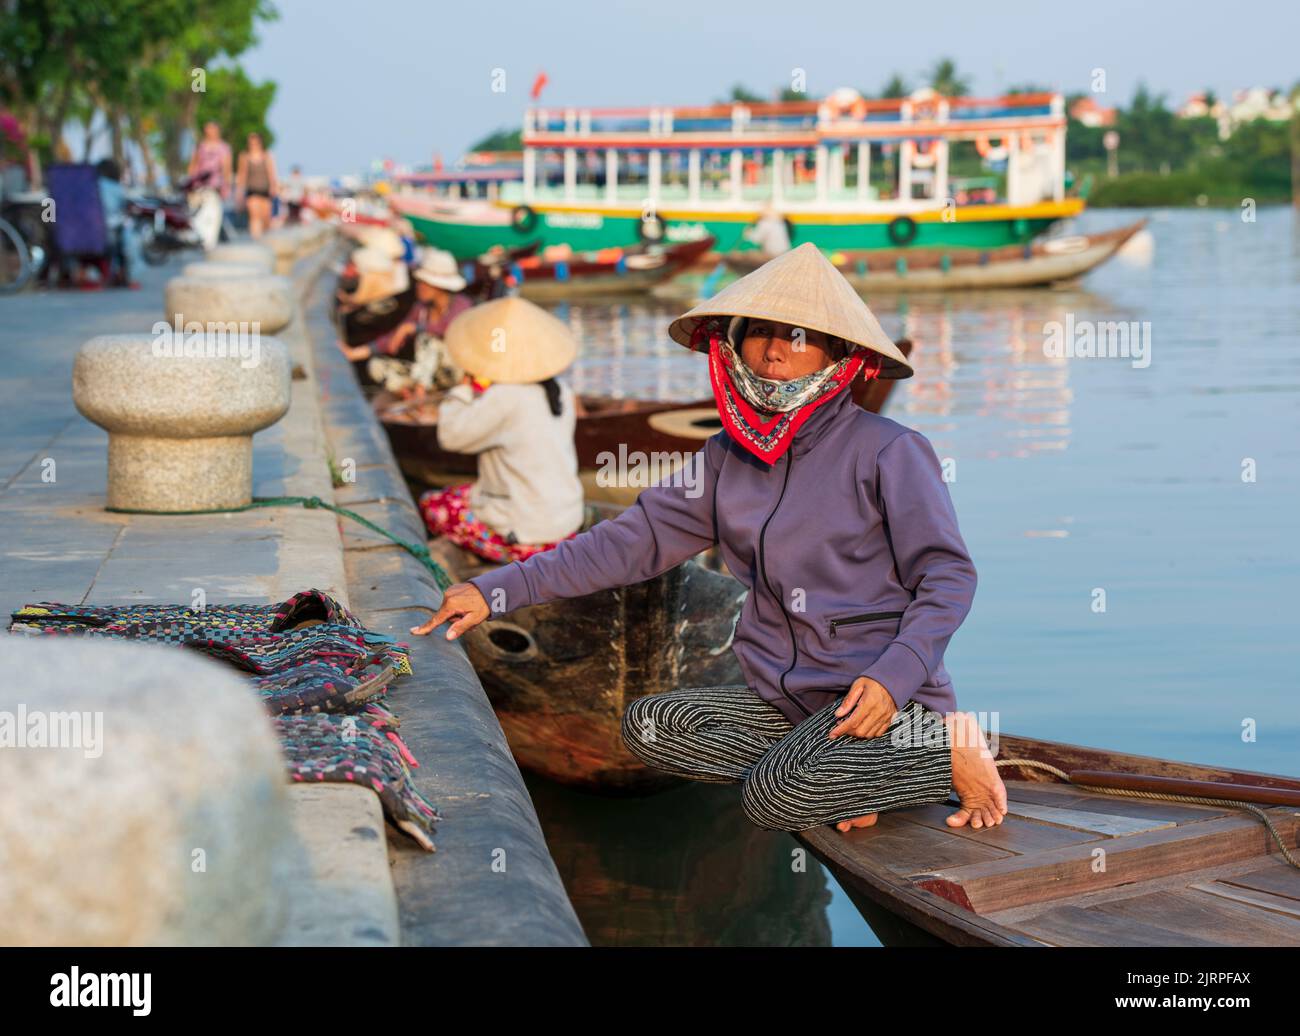 HOI AN, VIETNAM - APRIL 19, 2017: Sightseeing boats in Hoi An city. Vietnam a popular tourist destination of Asia. Hoi An is recognized as a World Her Stock Photo